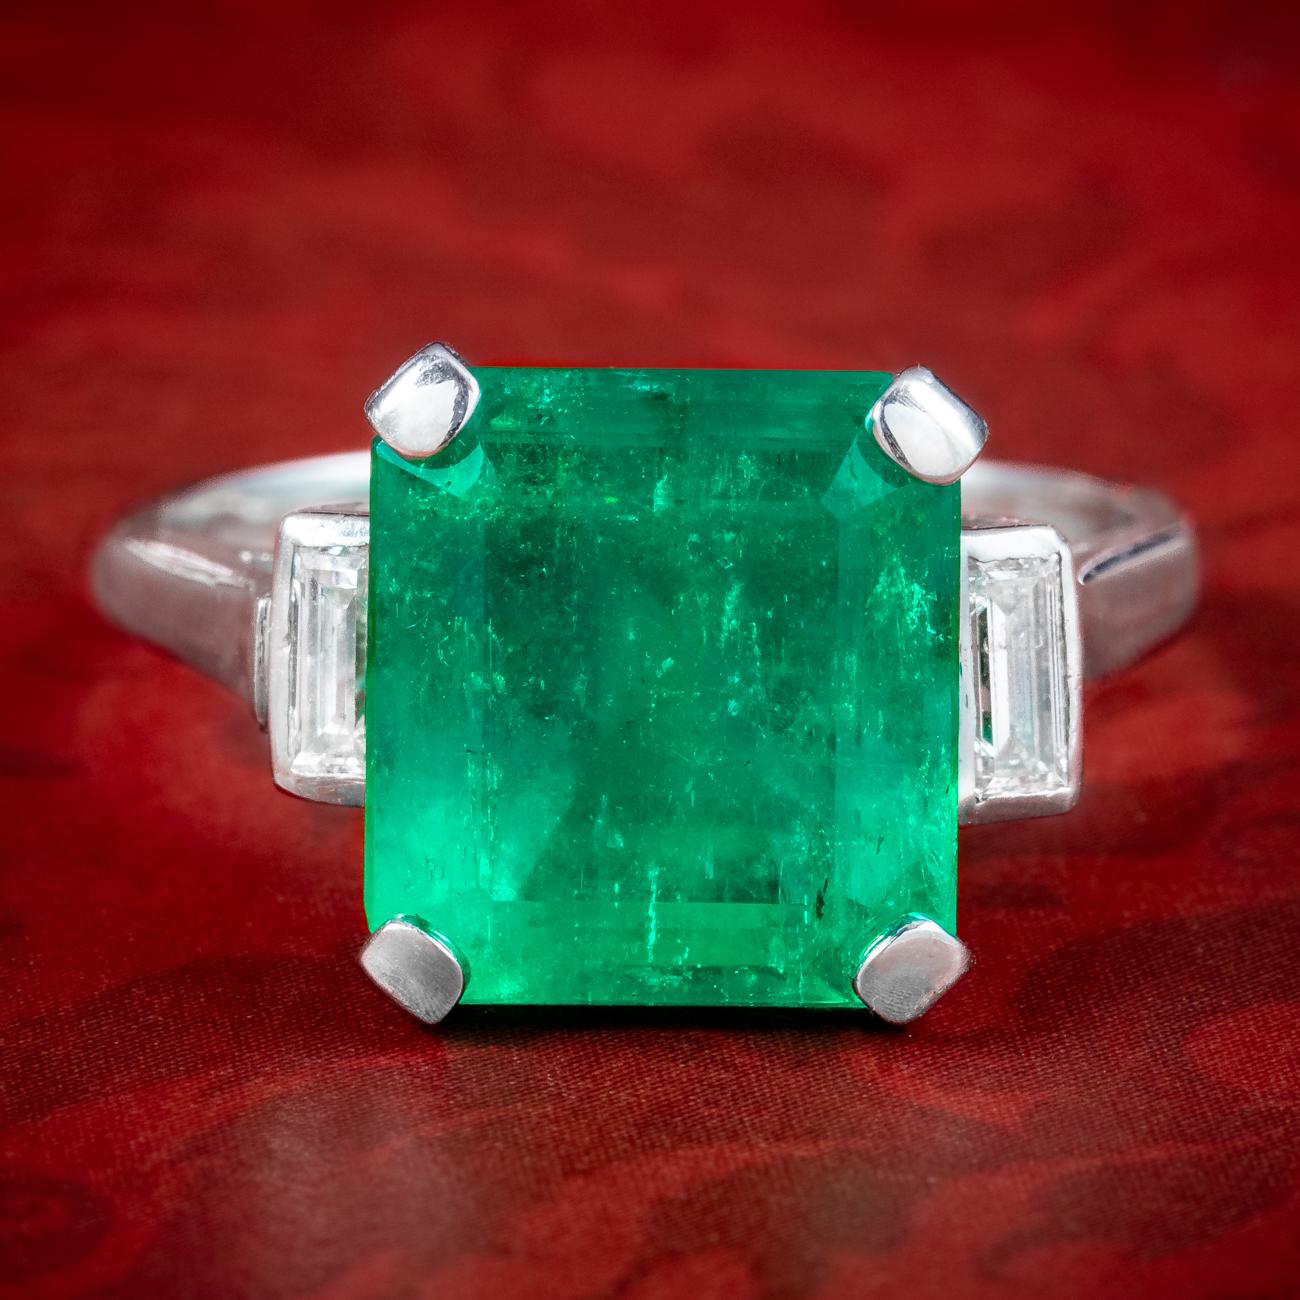 A magnificent Art Deco trilogy ring boasting a striking Colombian step cut emerald with an intense green hue. The stone is accompanied by a comprehensive gem certification that verifies it’s a natural Colombian emerald, weighing an impressive 7.24